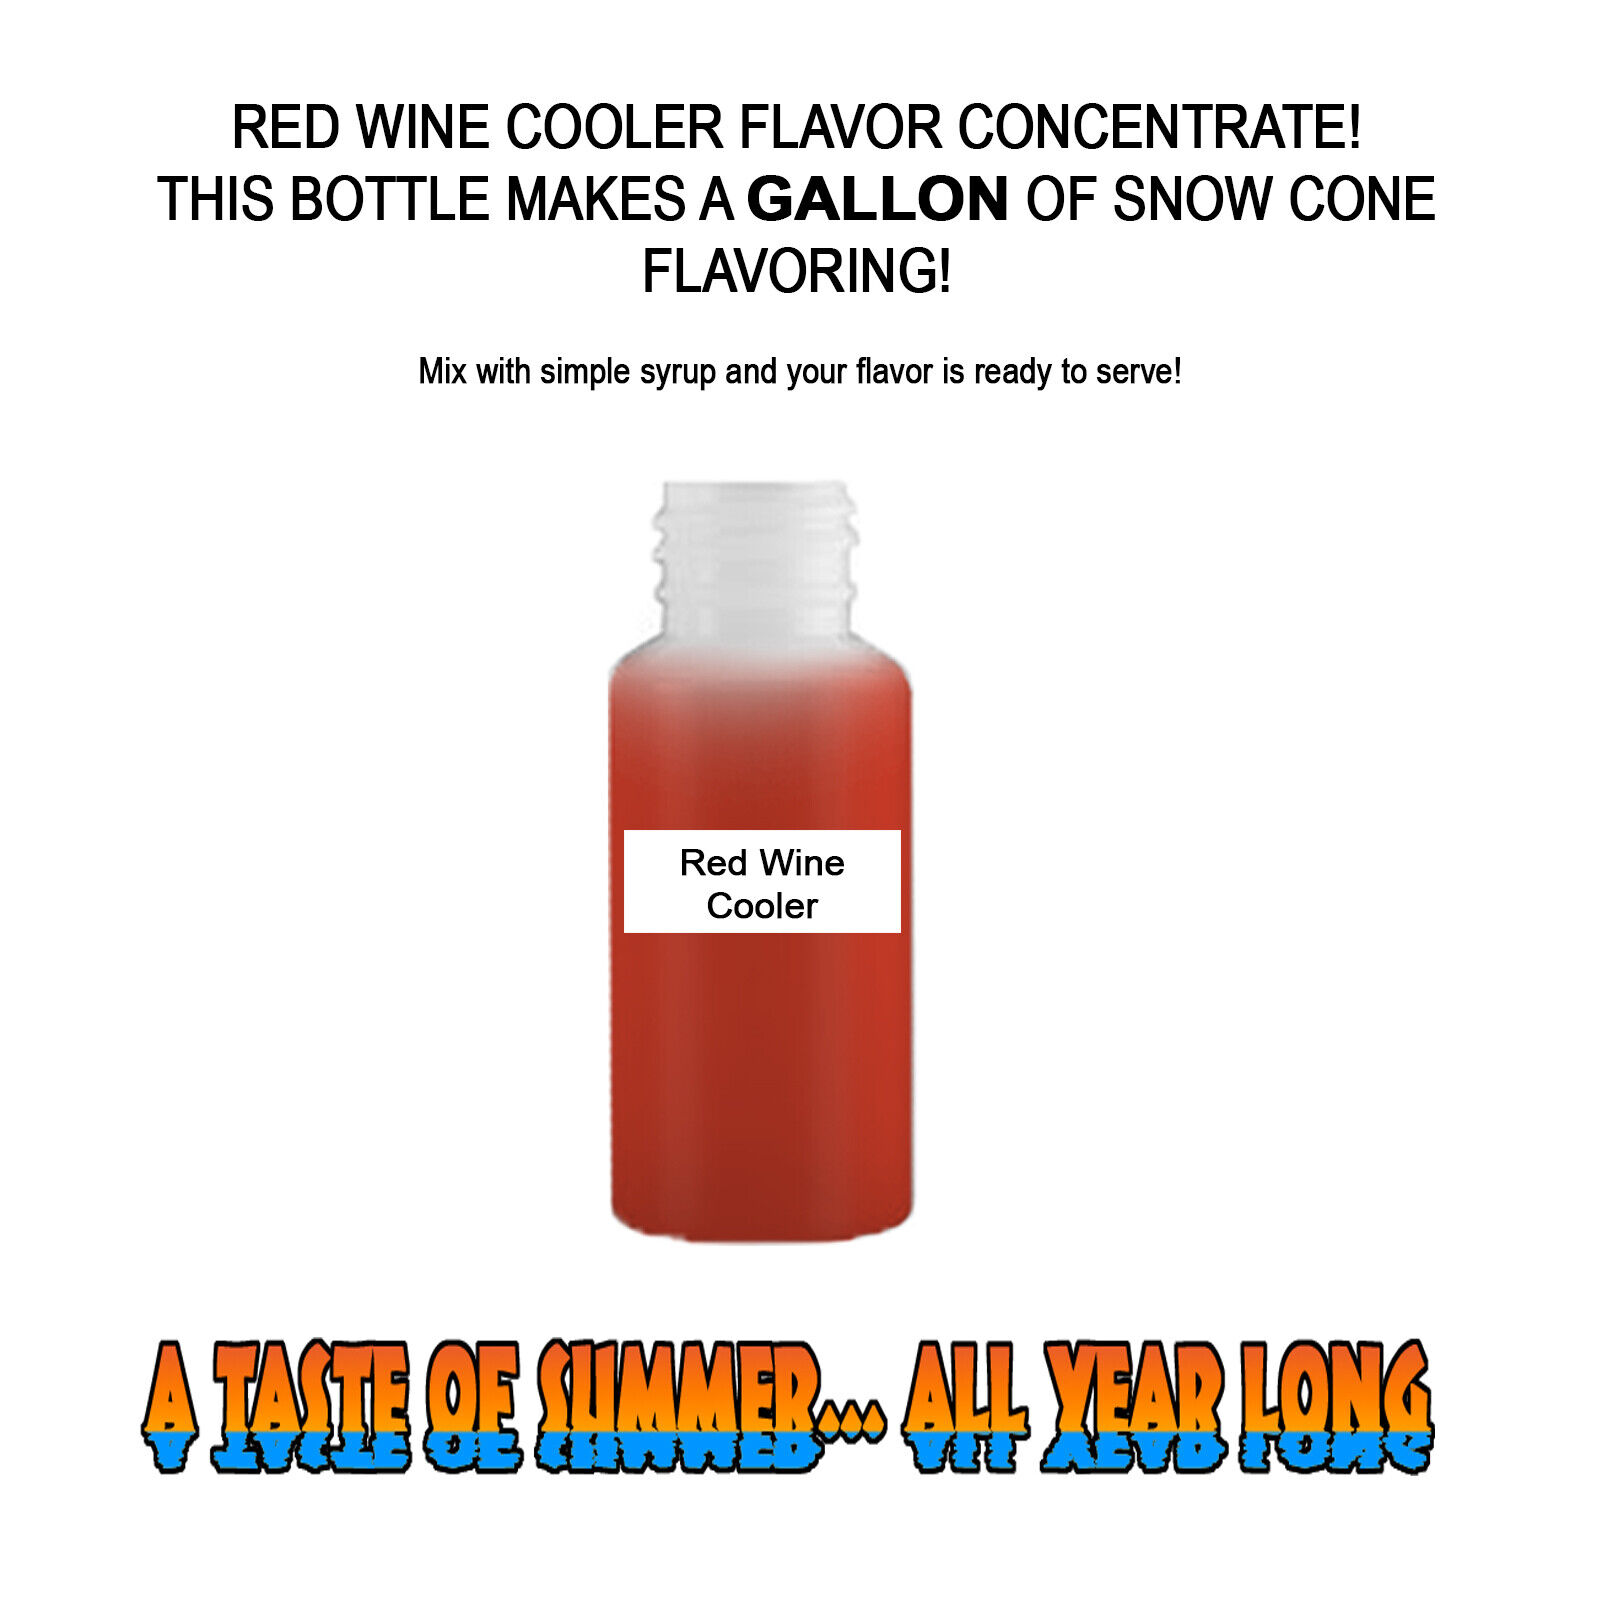 RED WINE COOLER MIX SNOW CONE/SHAVED ICE FLAVOR CONCENTRATE MAKE